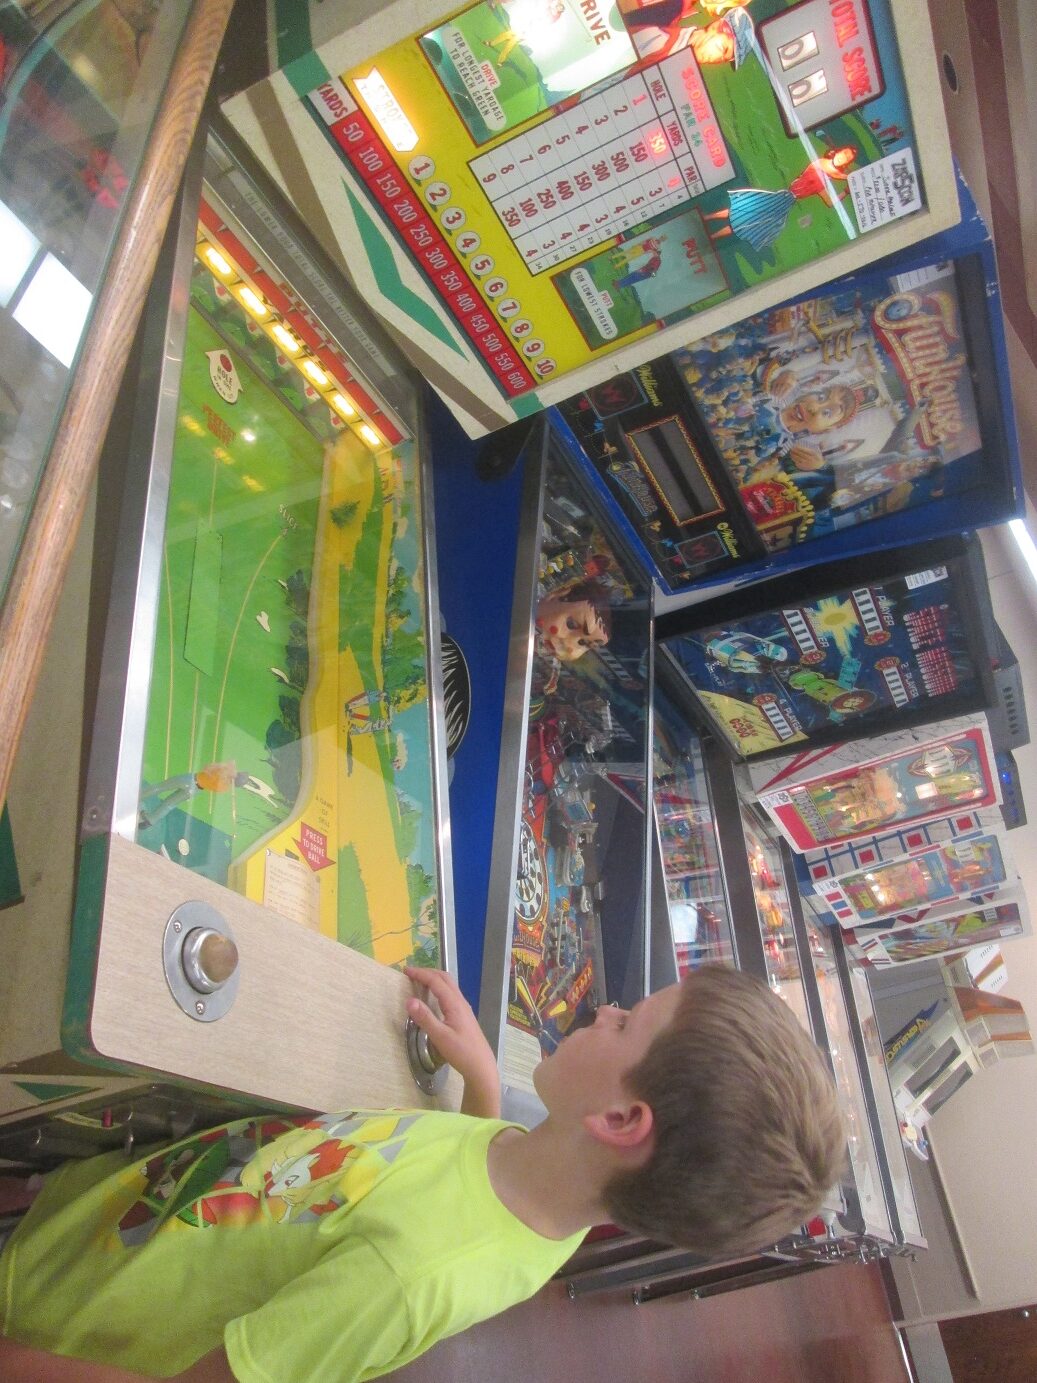 Our kids are always excited for ZapCon Eve. Milo had fun checking out some of the vintage games.